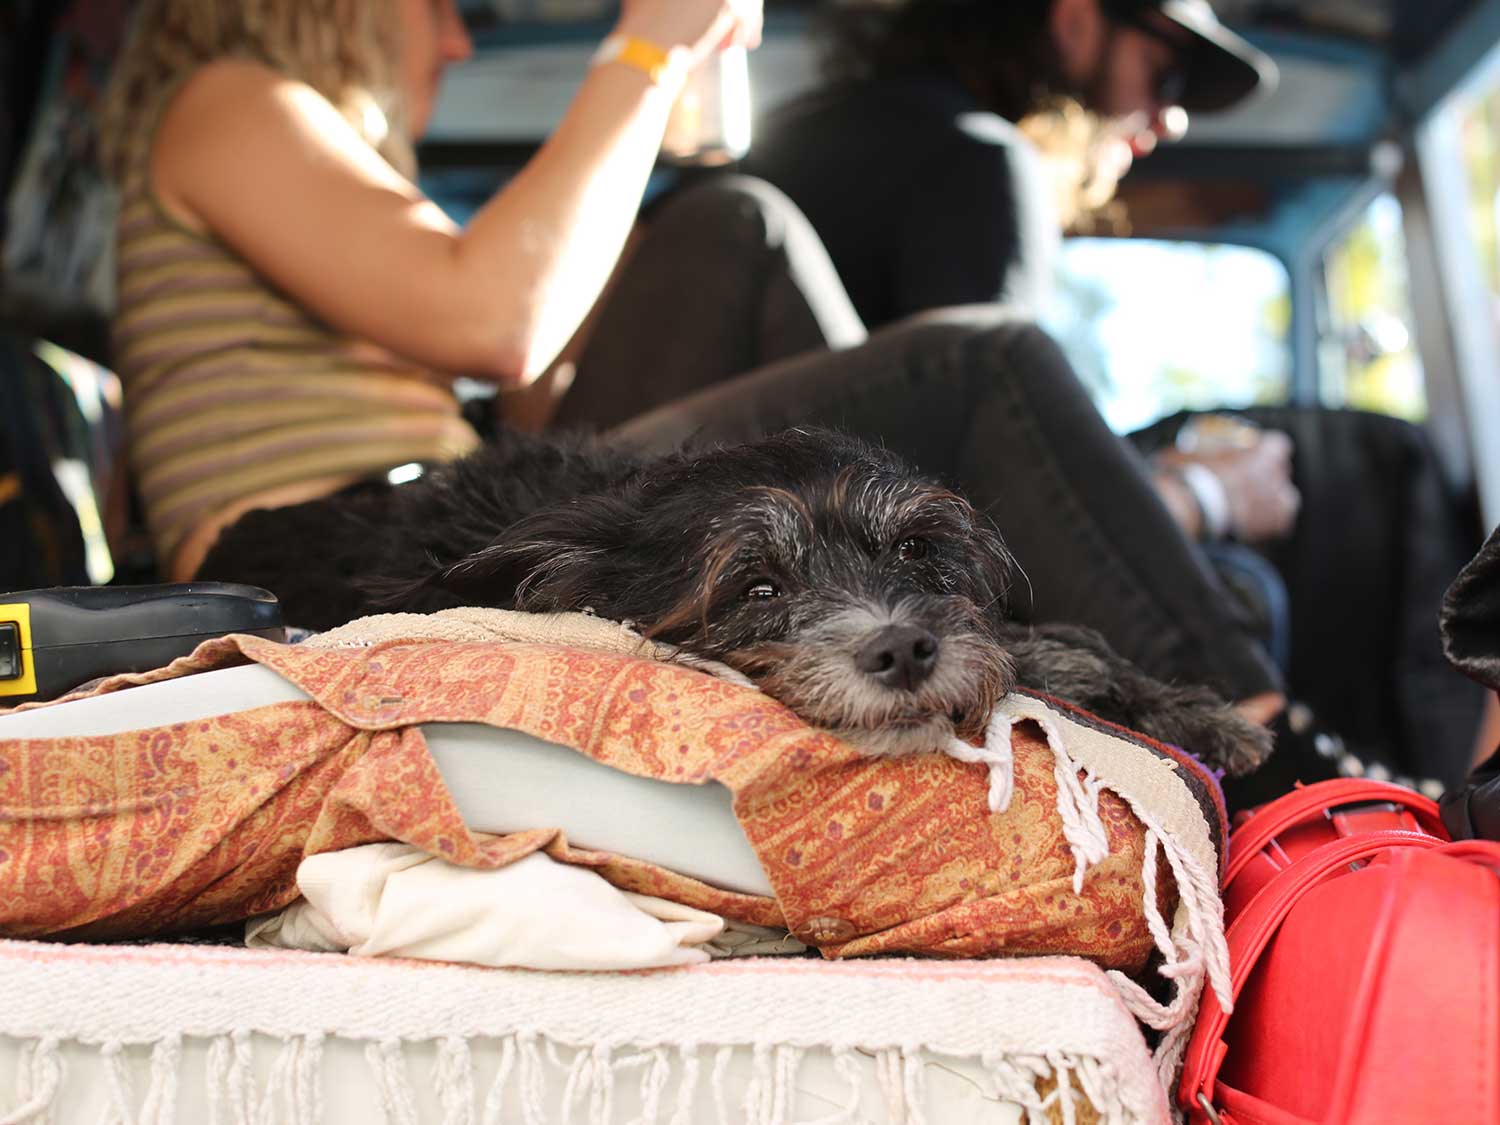 Best Boy in Show resting in one of the custom vans. Paradise Road Show is family and pet friendly!